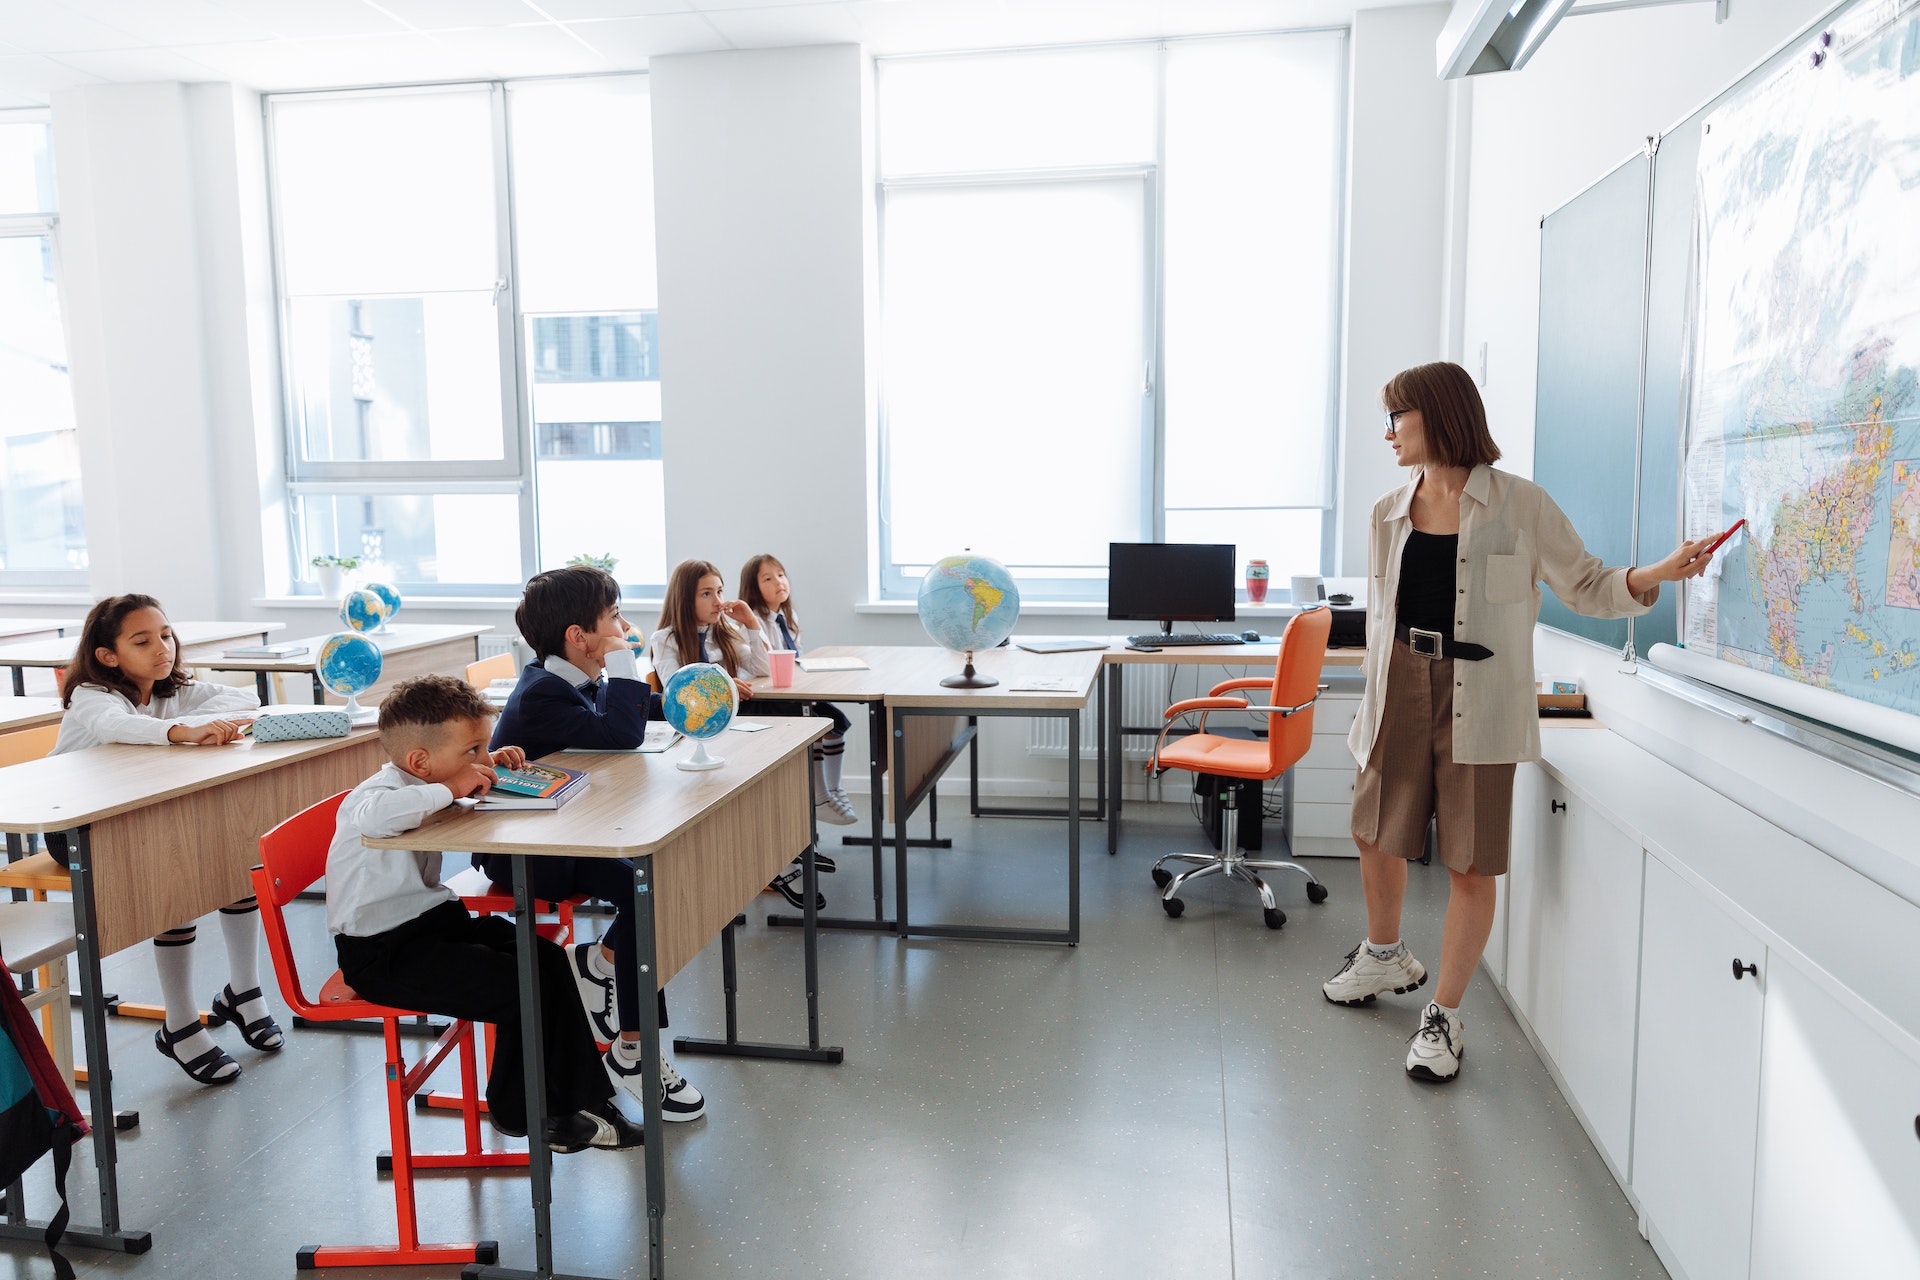 How to manage multilingual classrooms